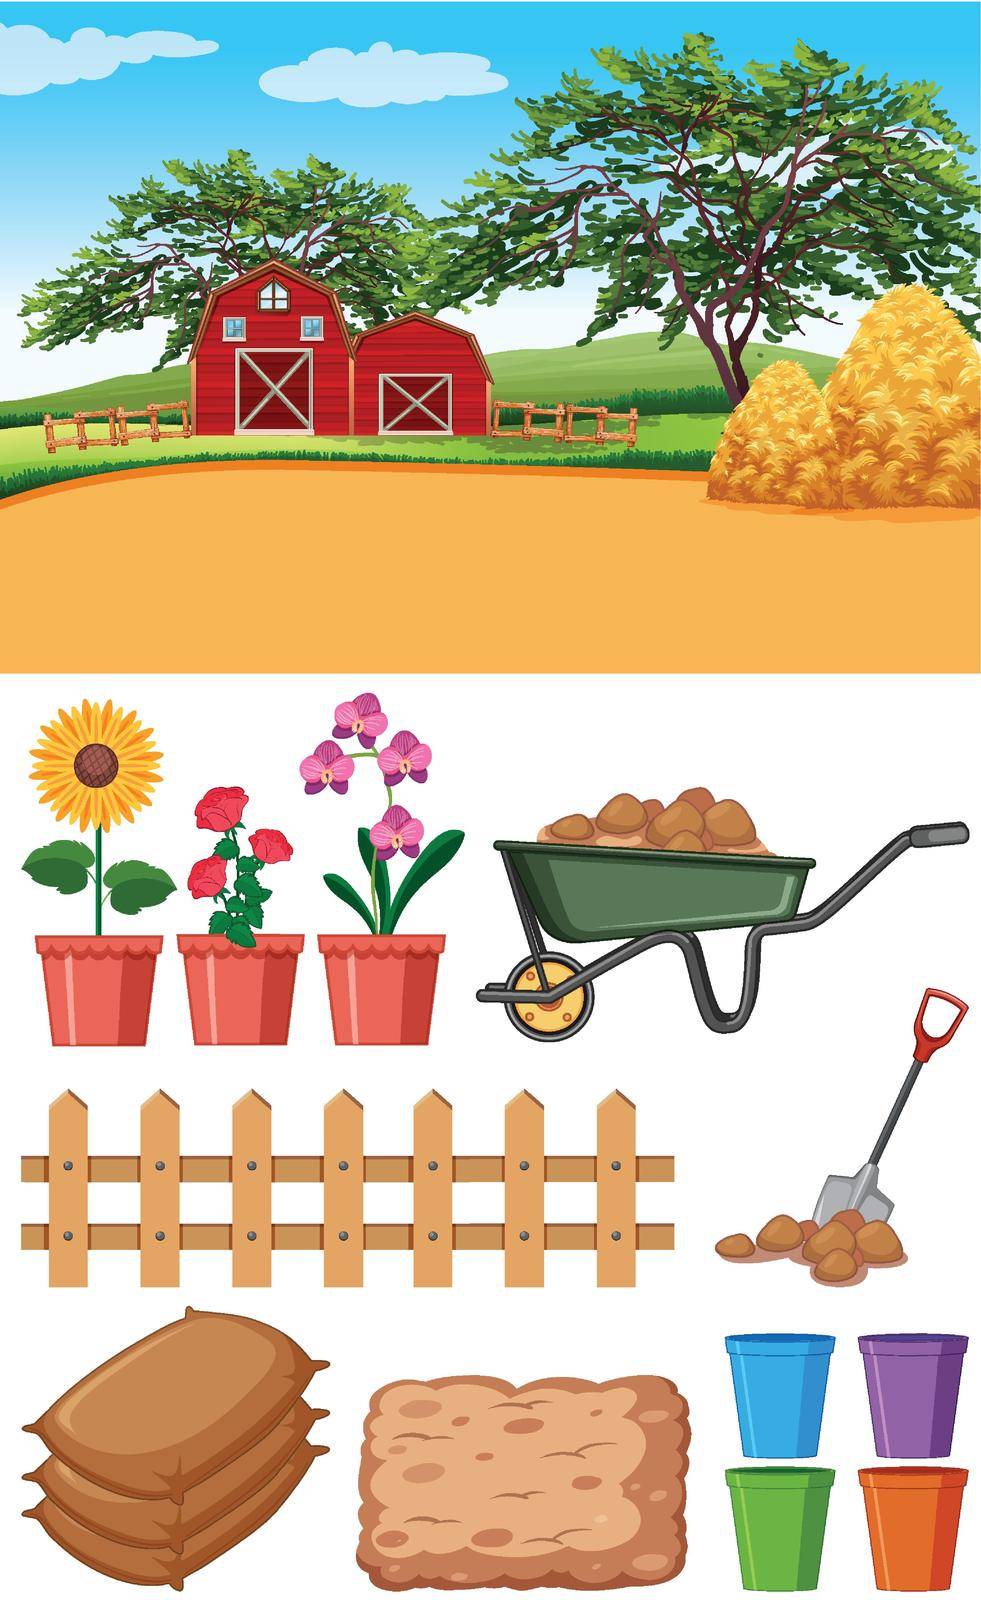 Farm scene with barns and other farming items illustration